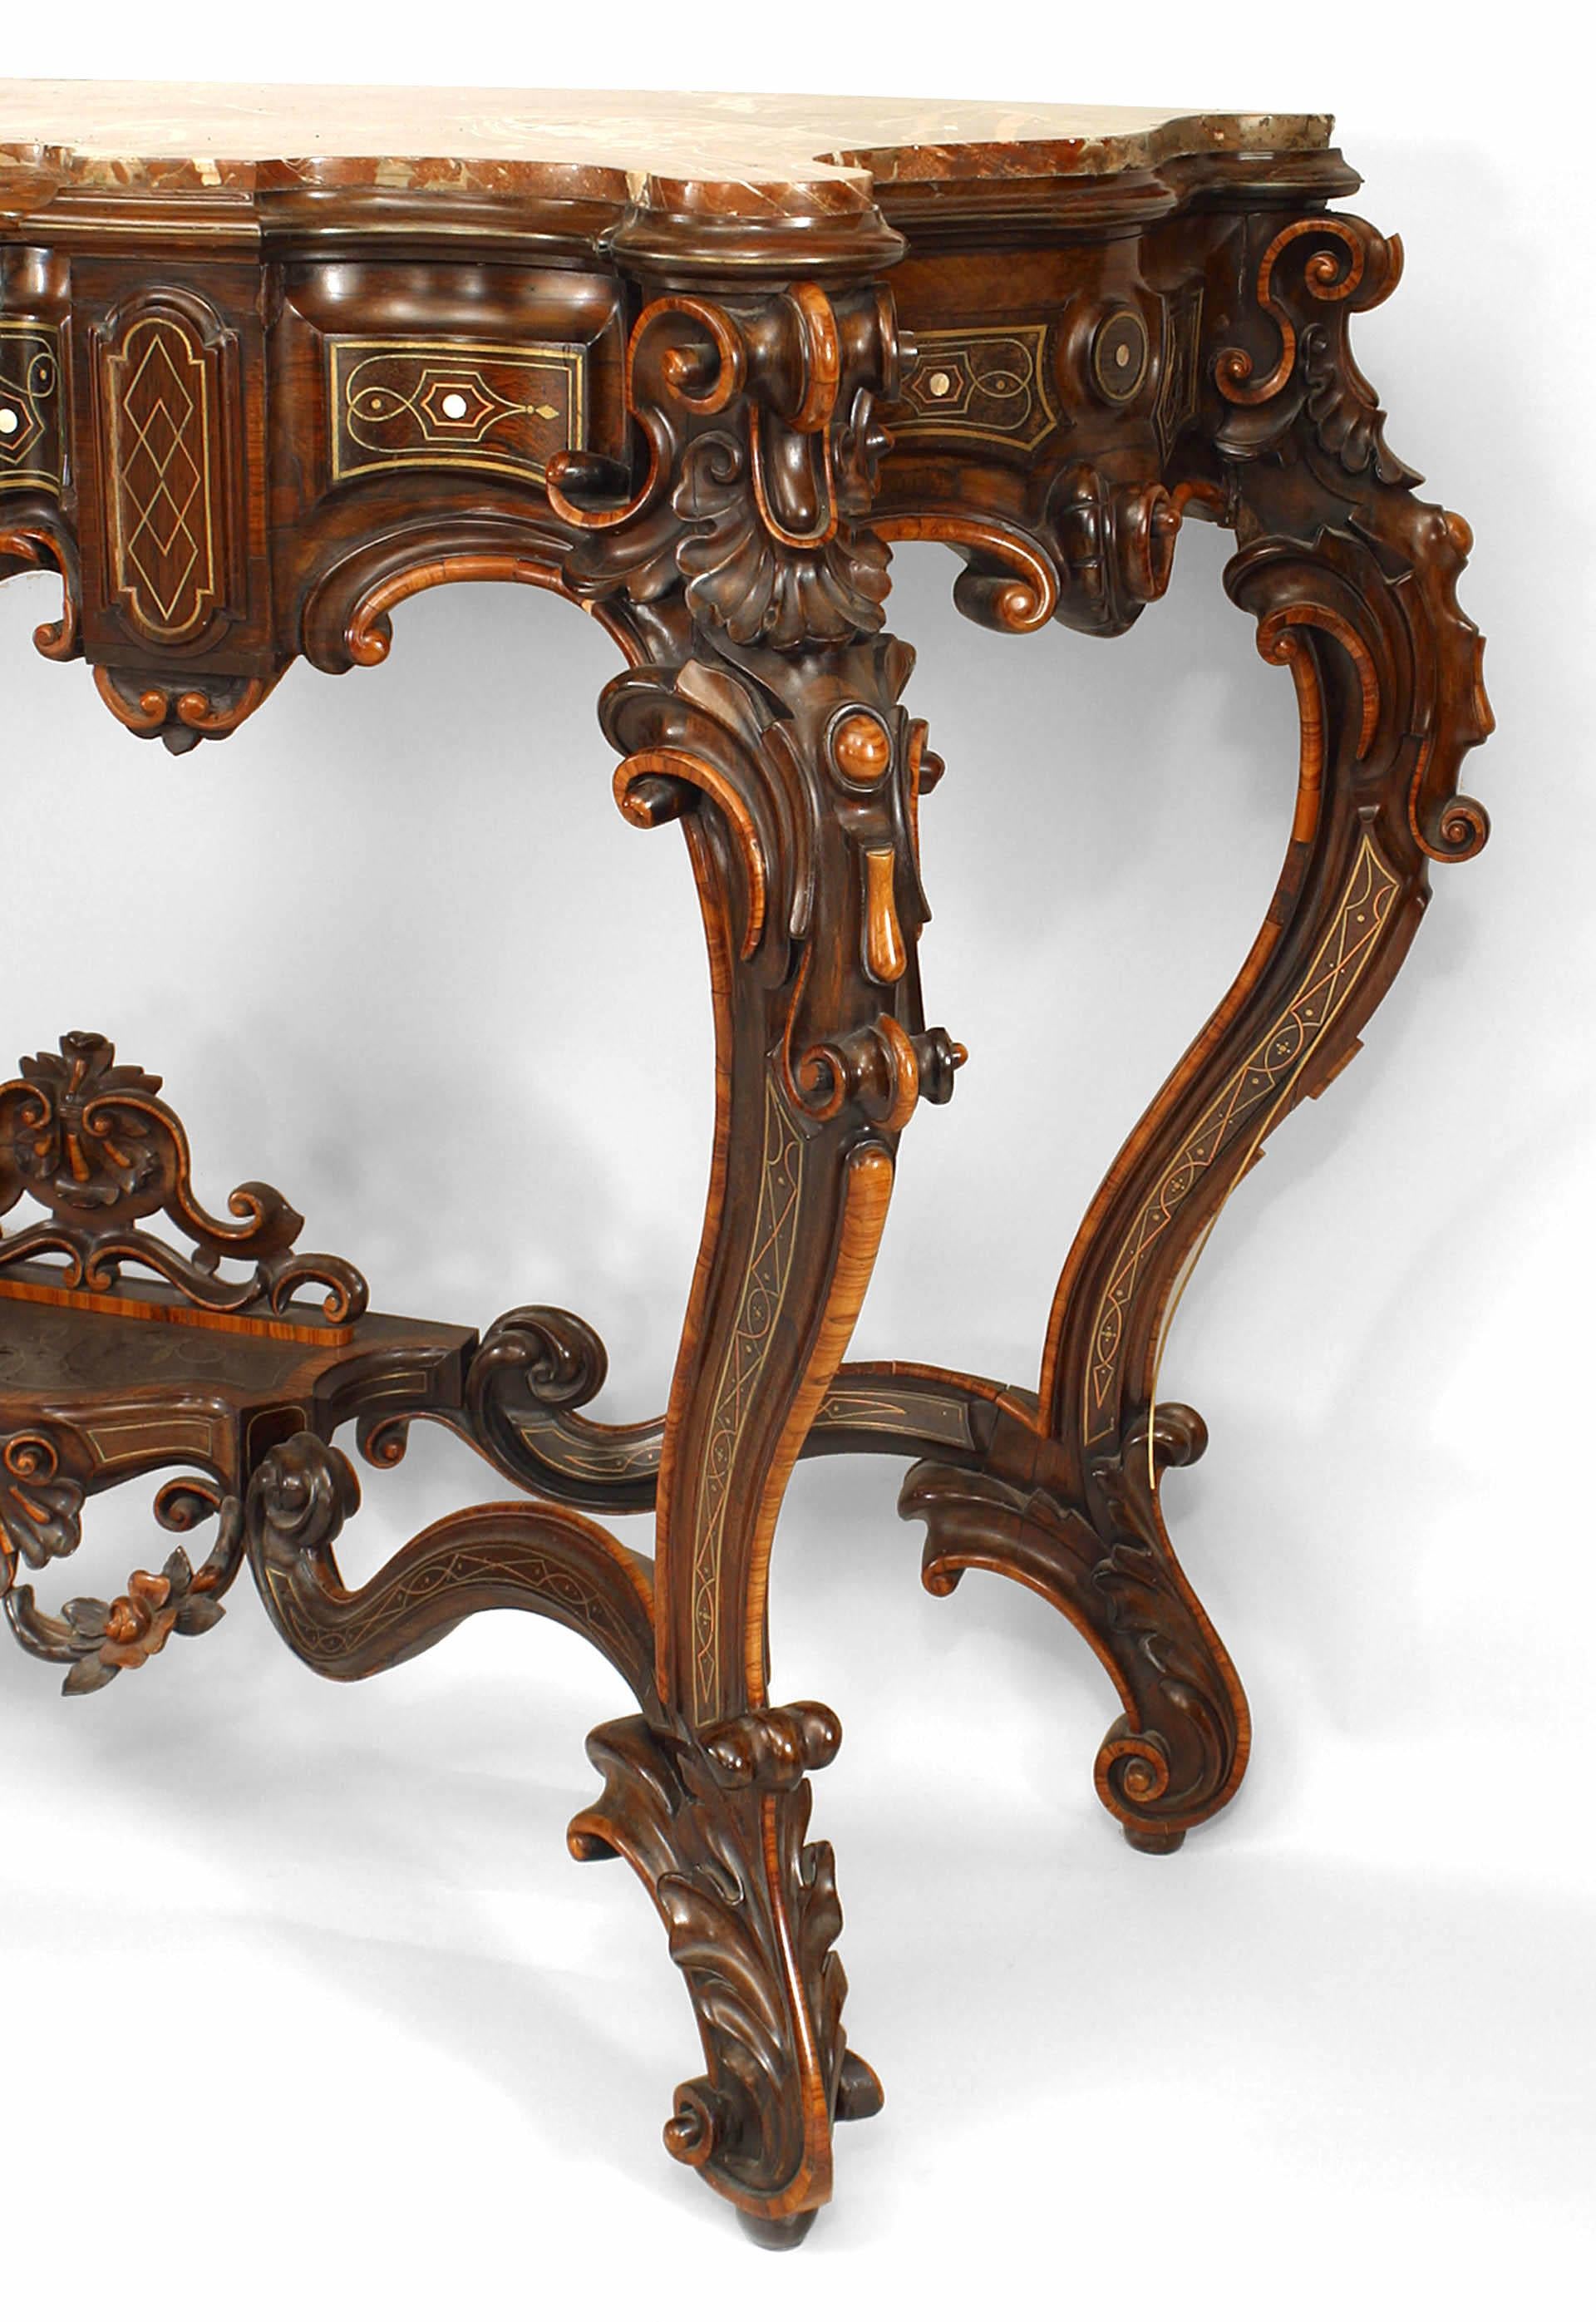 Pair of Italian Rococo-style (19th Century) rosewood consoles with rouge Siena marble tops inlaid with kingwood, brass & mother of pearl. (Manner of Gotti) (PRICED AS Pair) (Related Item: ROL001A)
